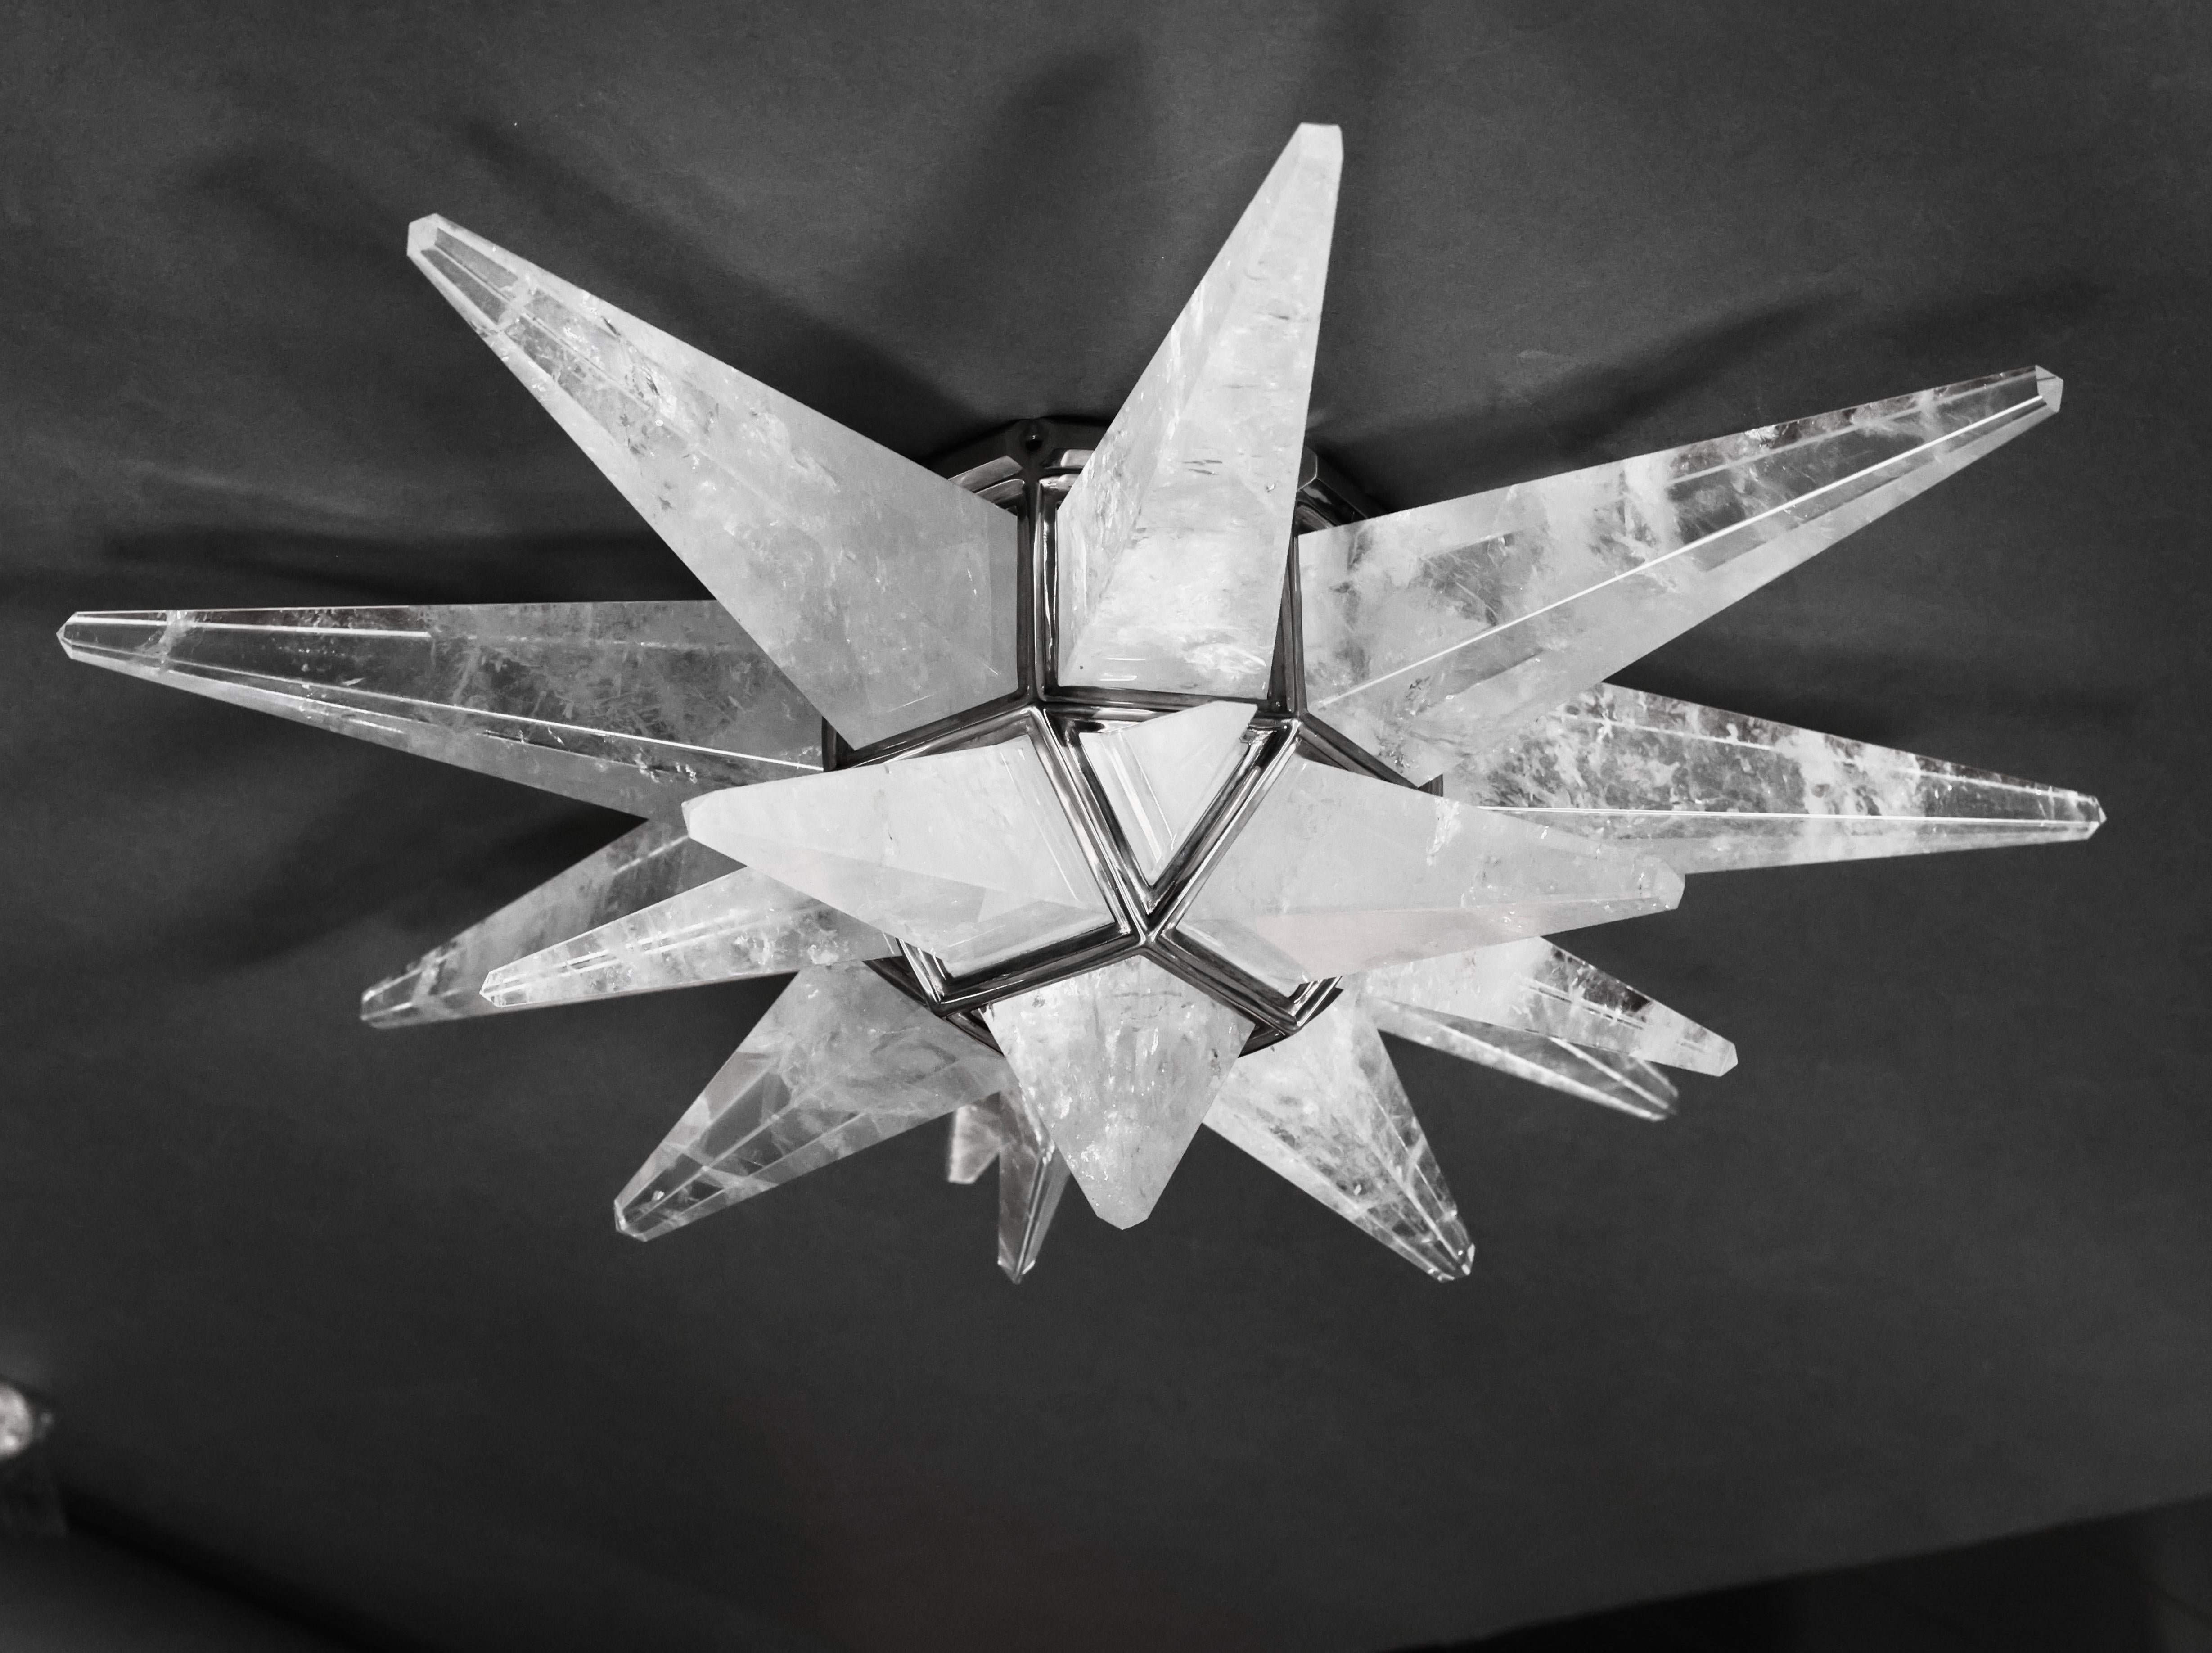 Star form rock crystal flushmount with polish nickel frame. Created by Phoenix Gallery, NYC.